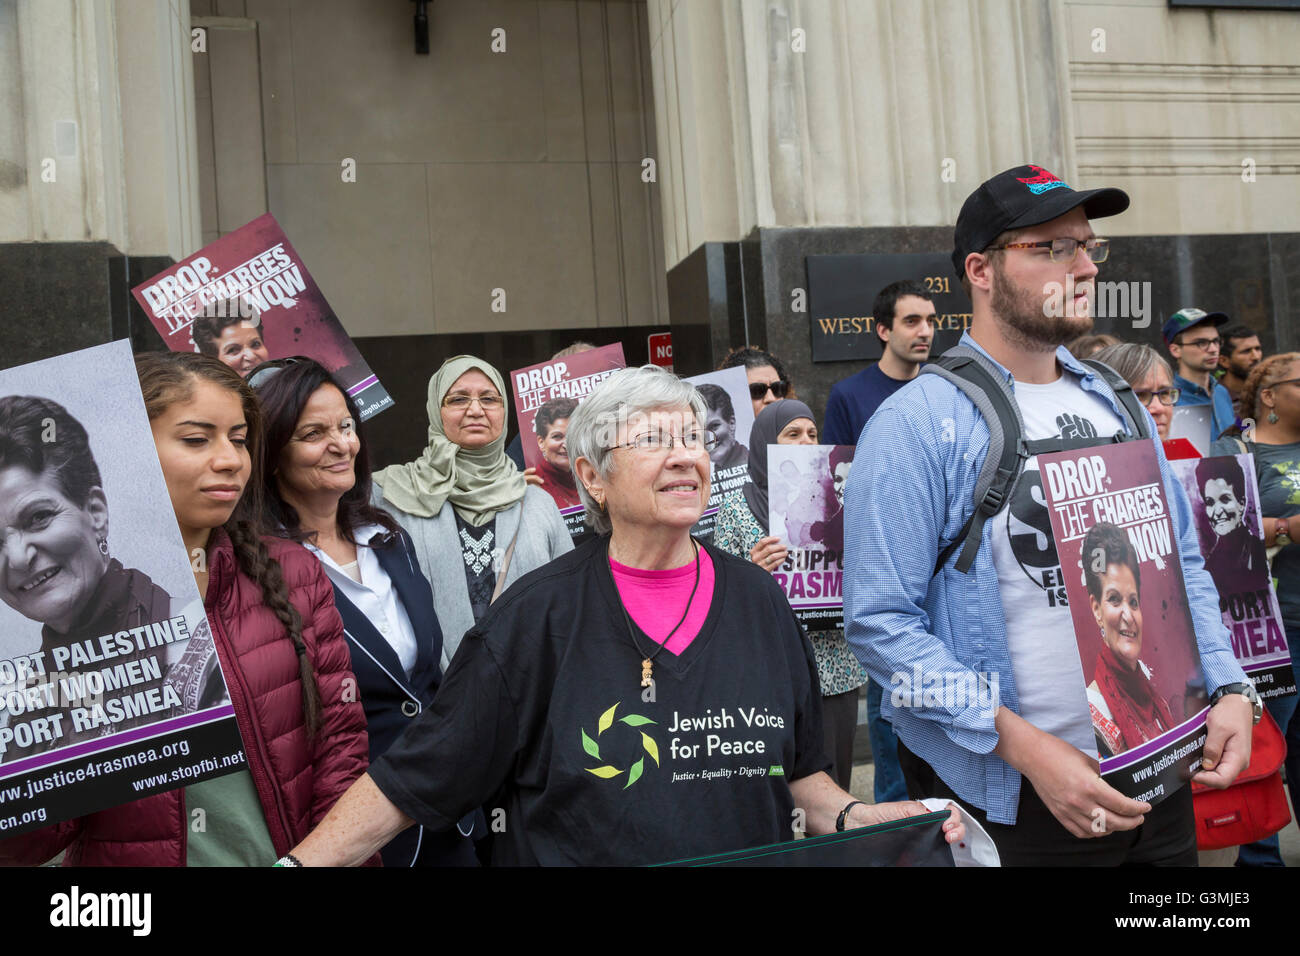 Detroit, Michigan, USA. 13th June, 2016. Supporters of Palestinian-American activist Rasmea Odeh (second from left) rallied outside a Federal Courthouse where a federal judge held a status conference on her request for a new trial. In 2015, Odeh was convicted of lying on her 2004 application for U.S. citizenship. But a federal appeals court ordered Judge Gershwin Drain to reconsider the case because he had improperly excluded testimony about Odeh's torture in an Israeli prison. Credit:  Jim West/Alamy Live News Stock Photo